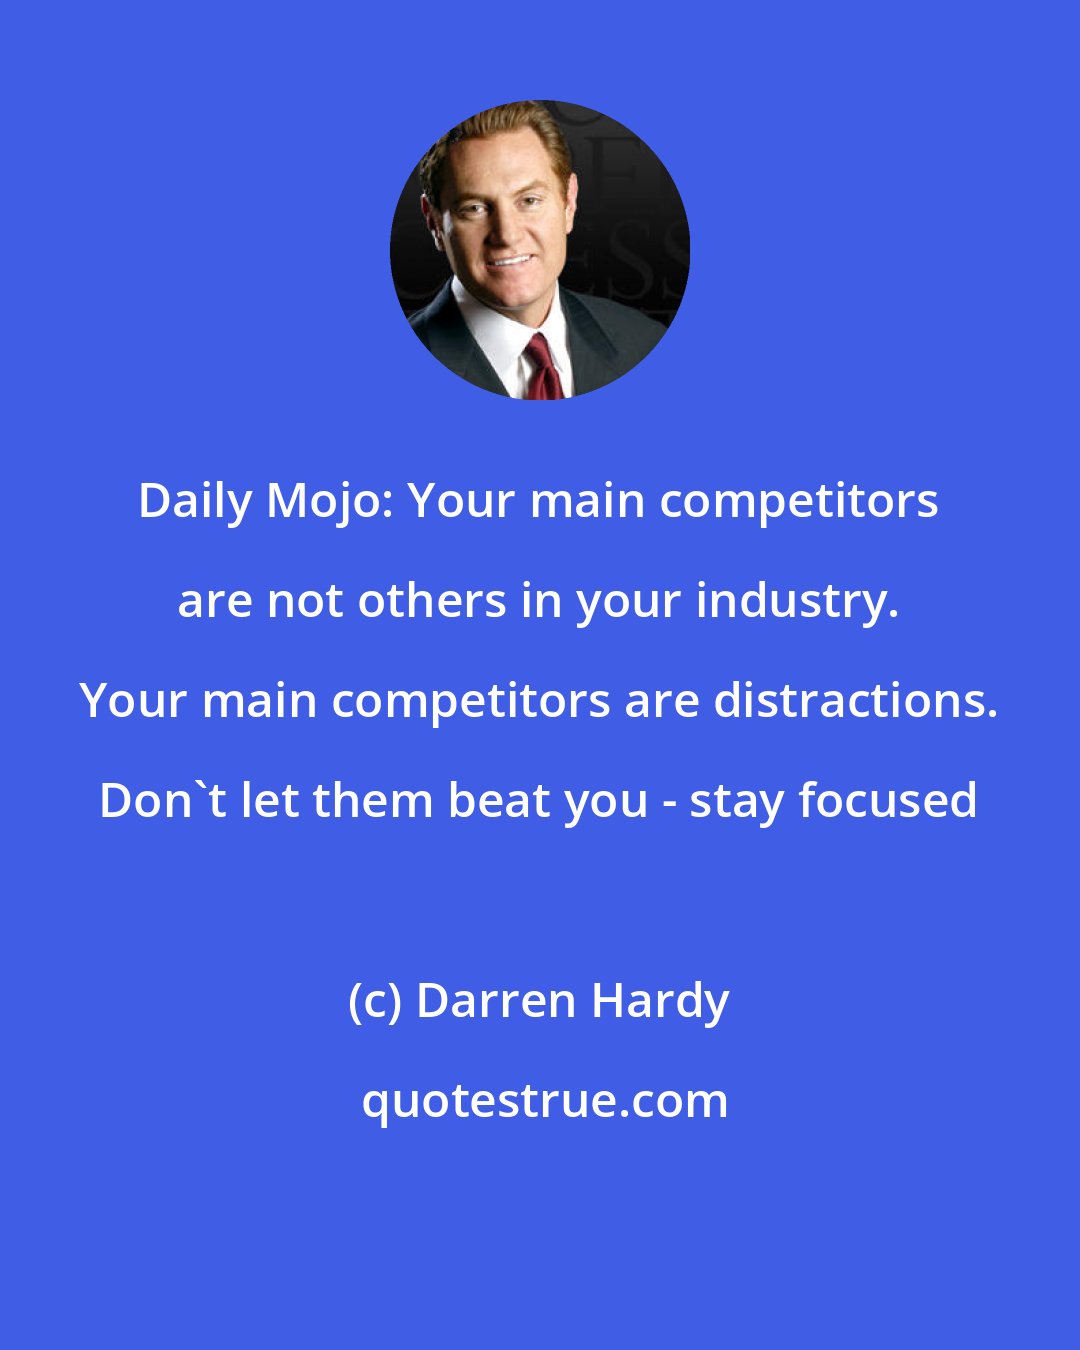 Darren Hardy: Daily Mojo: Your main competitors are not others in your industry. Your main competitors are distractions. Don't let them beat you - stay focused